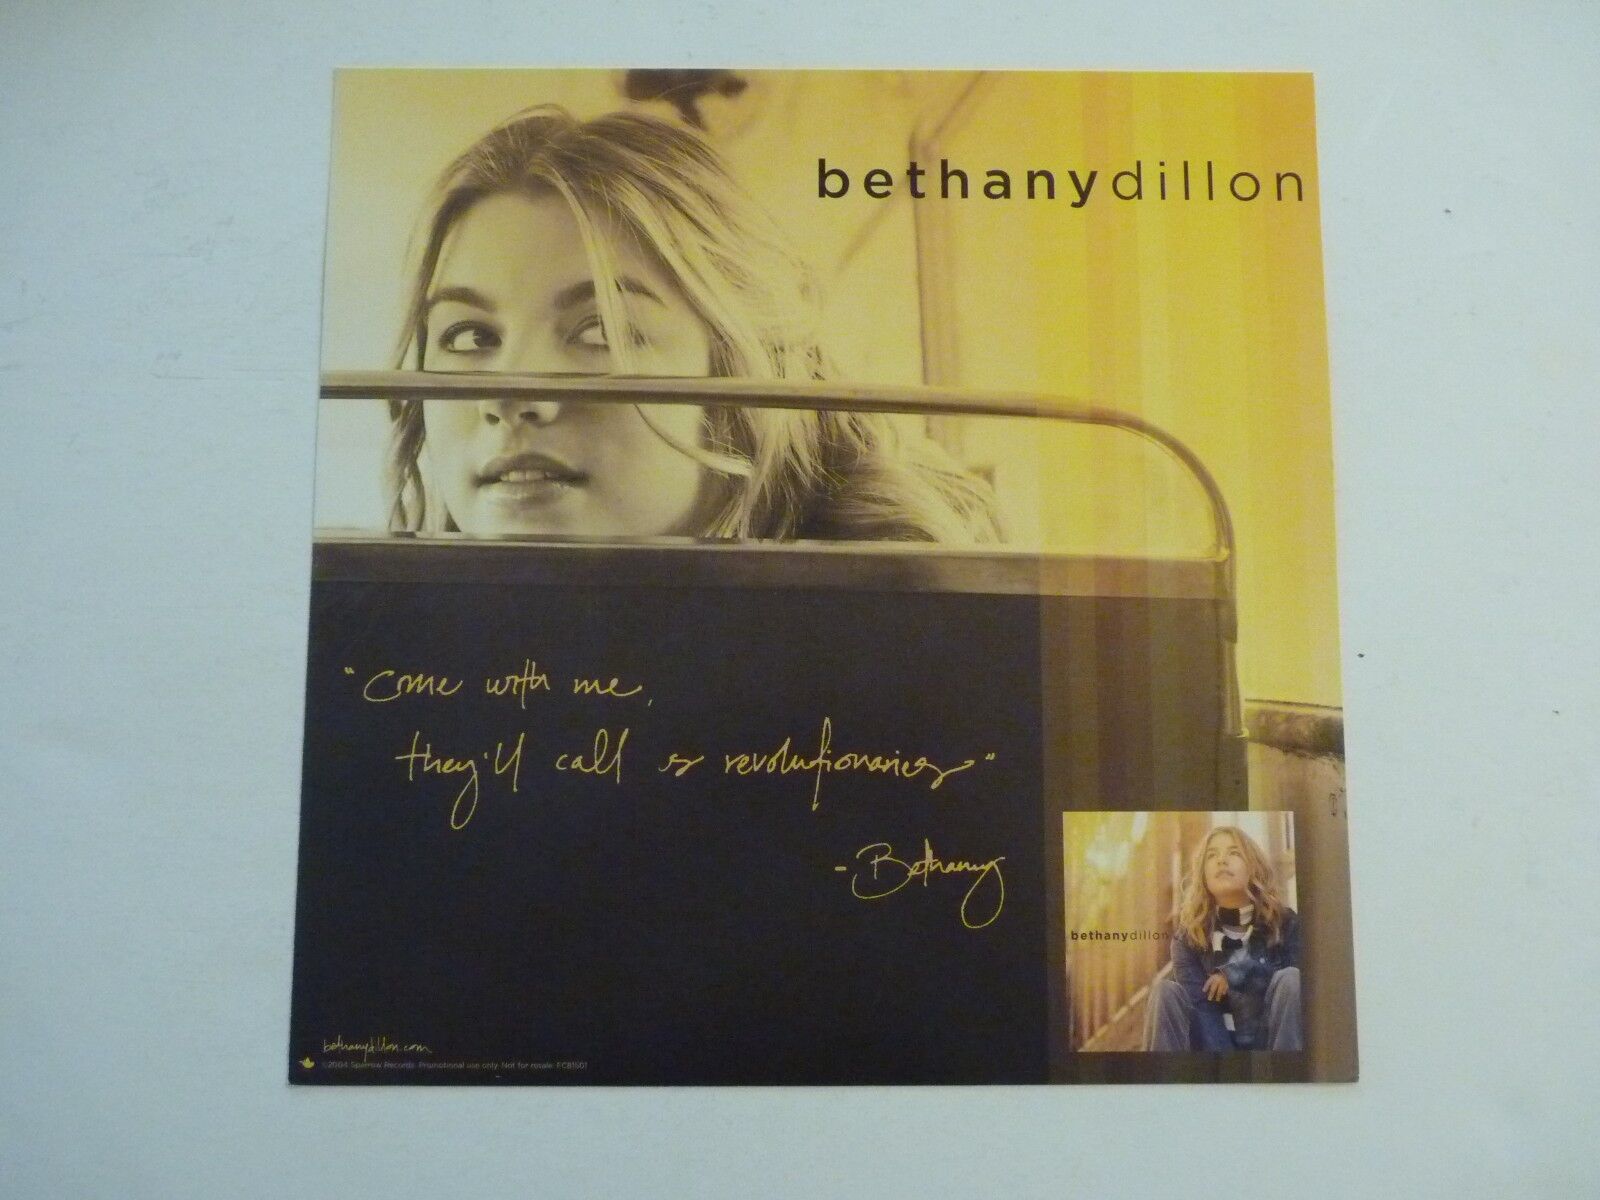 Bethany Dillon 2004 Promo LP Record Photo Poster painting Flat 12x12 Poster